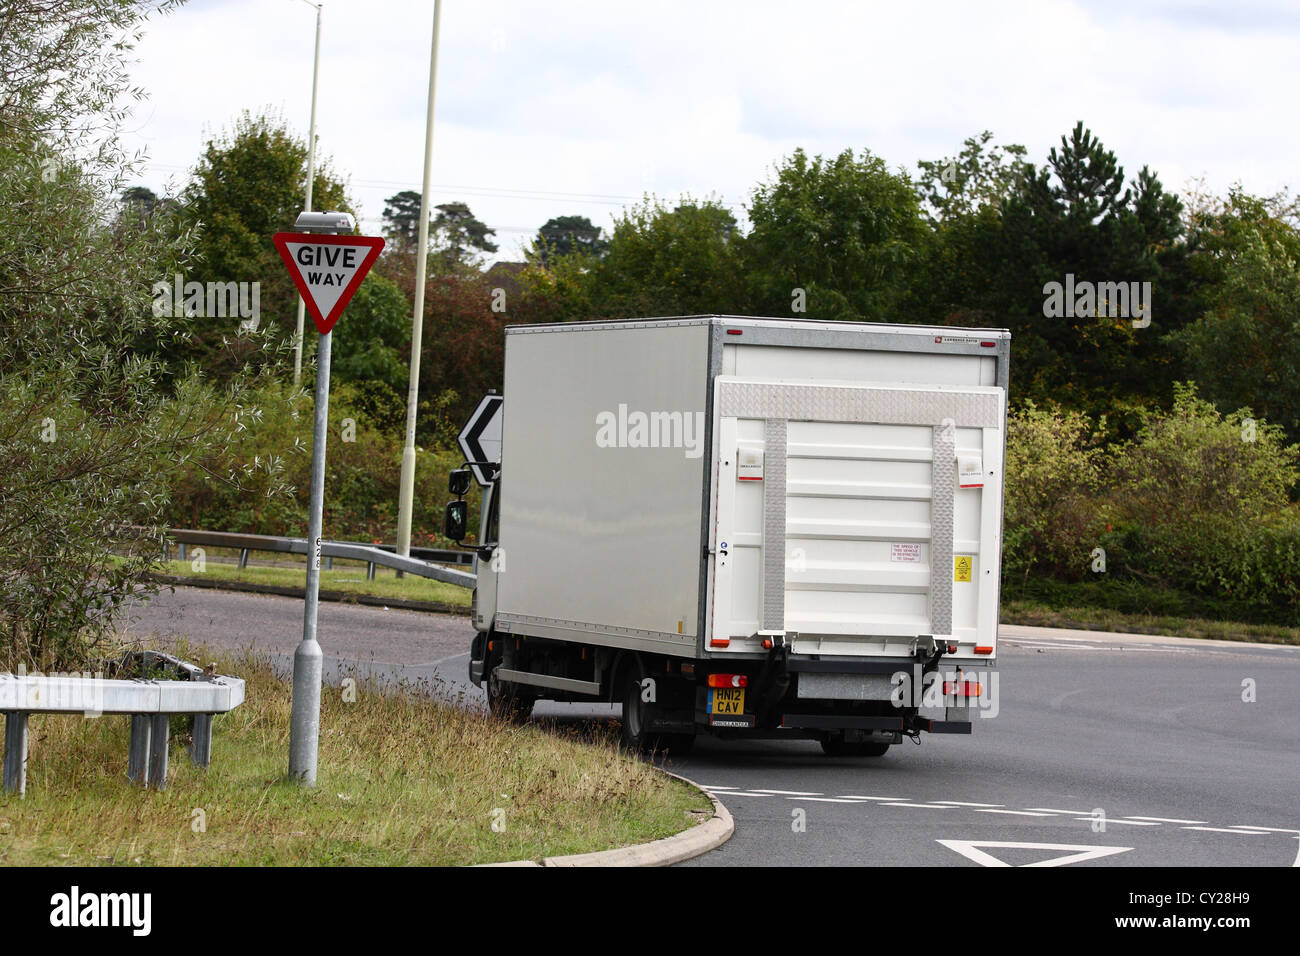 An unmarked truck traveling along a road in England Stock Photo